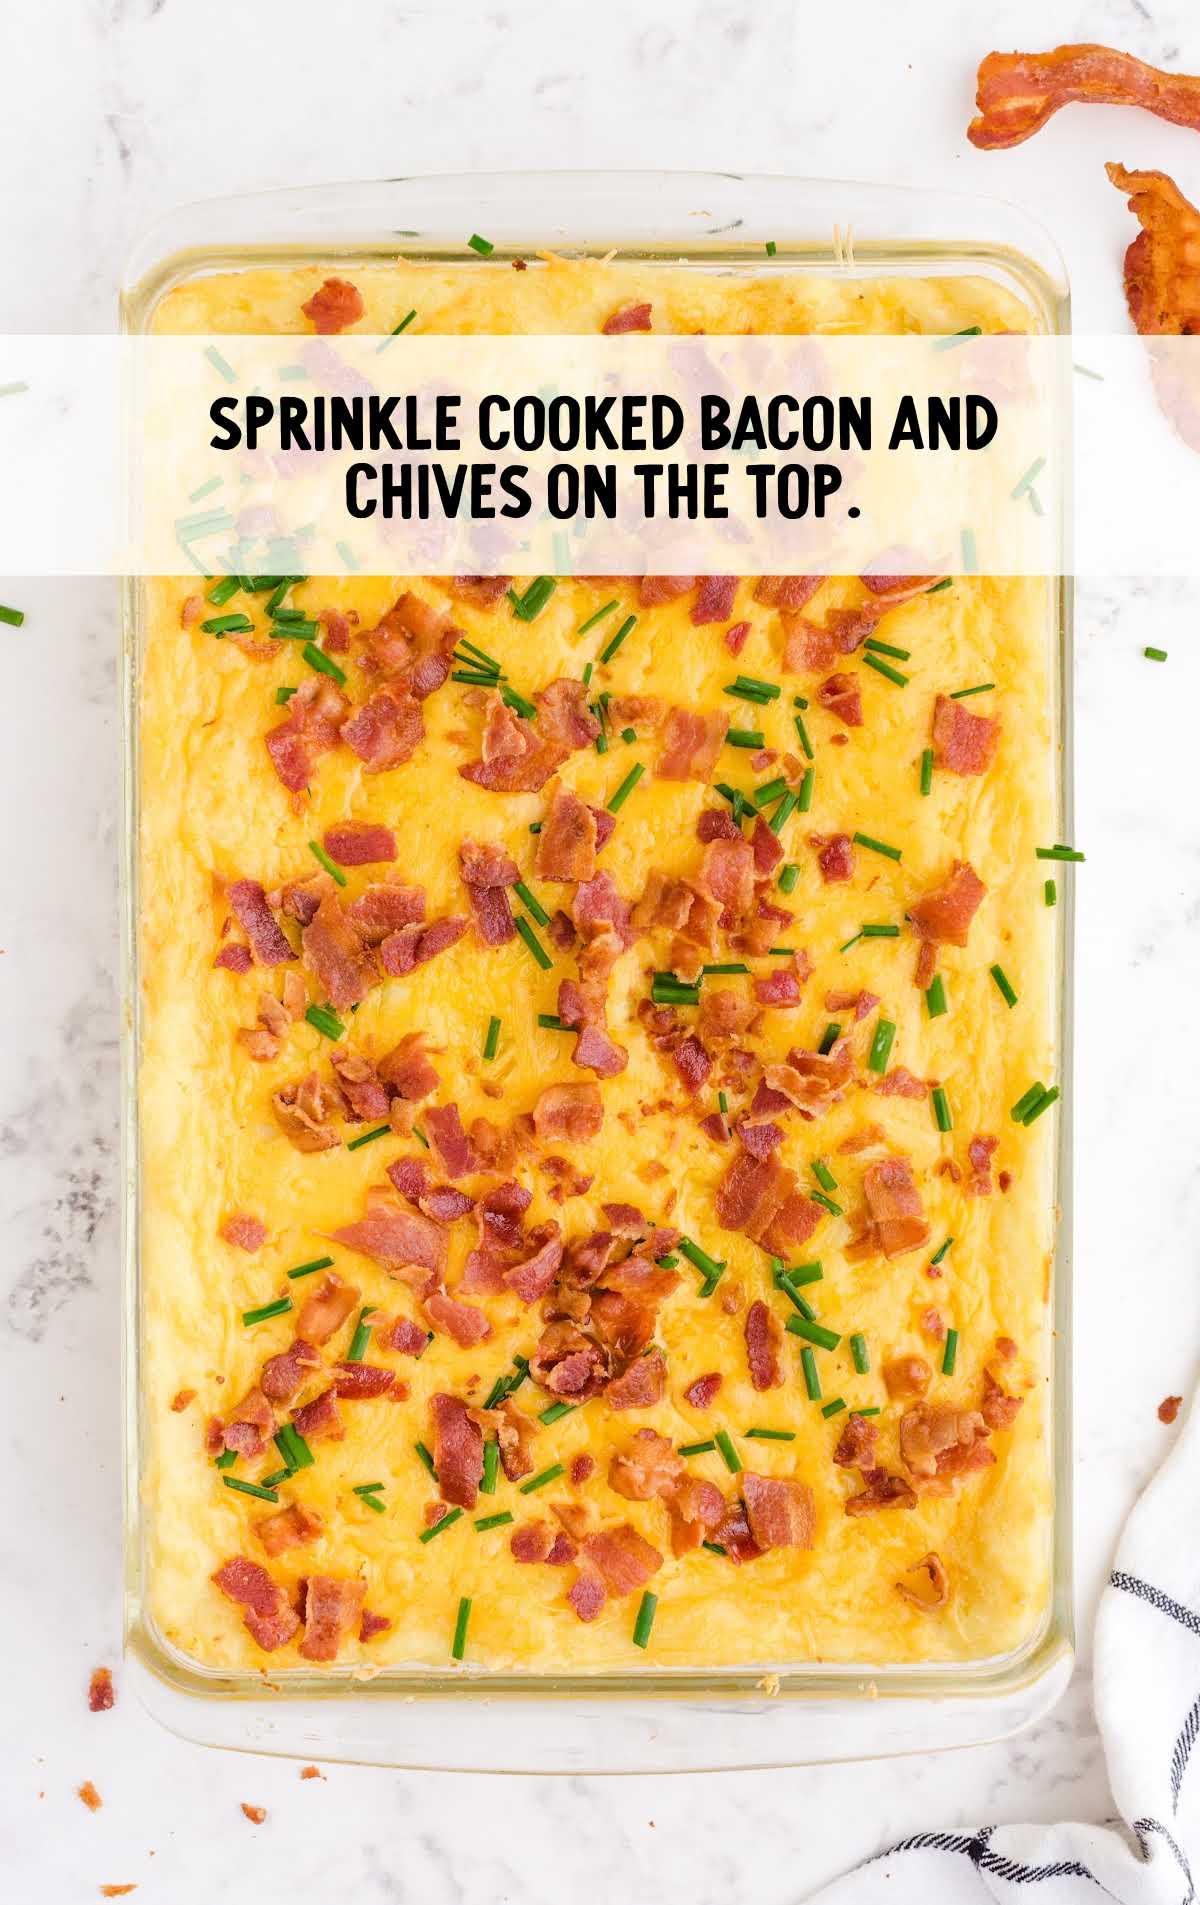 cooked bacon and chives sprinkled on top of the casserole